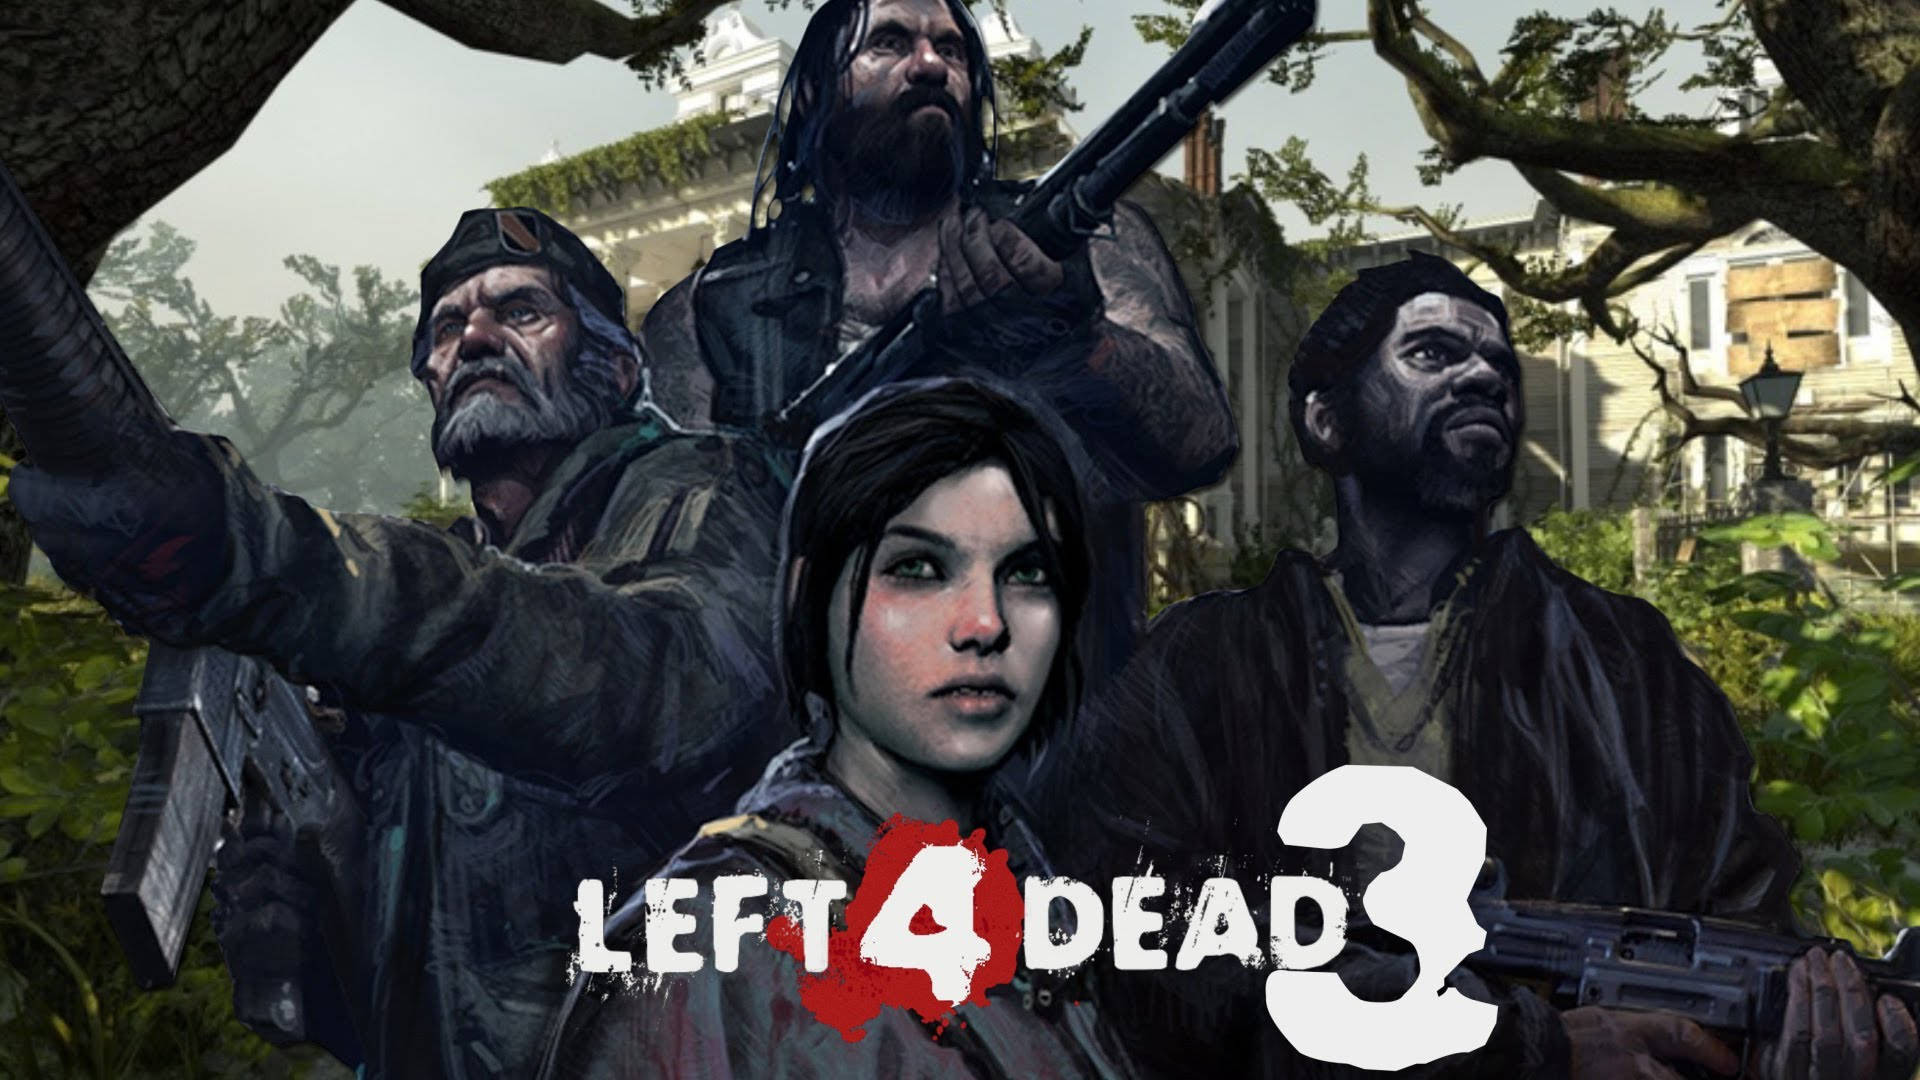 Left 4 Dead 3 Character Poster Background